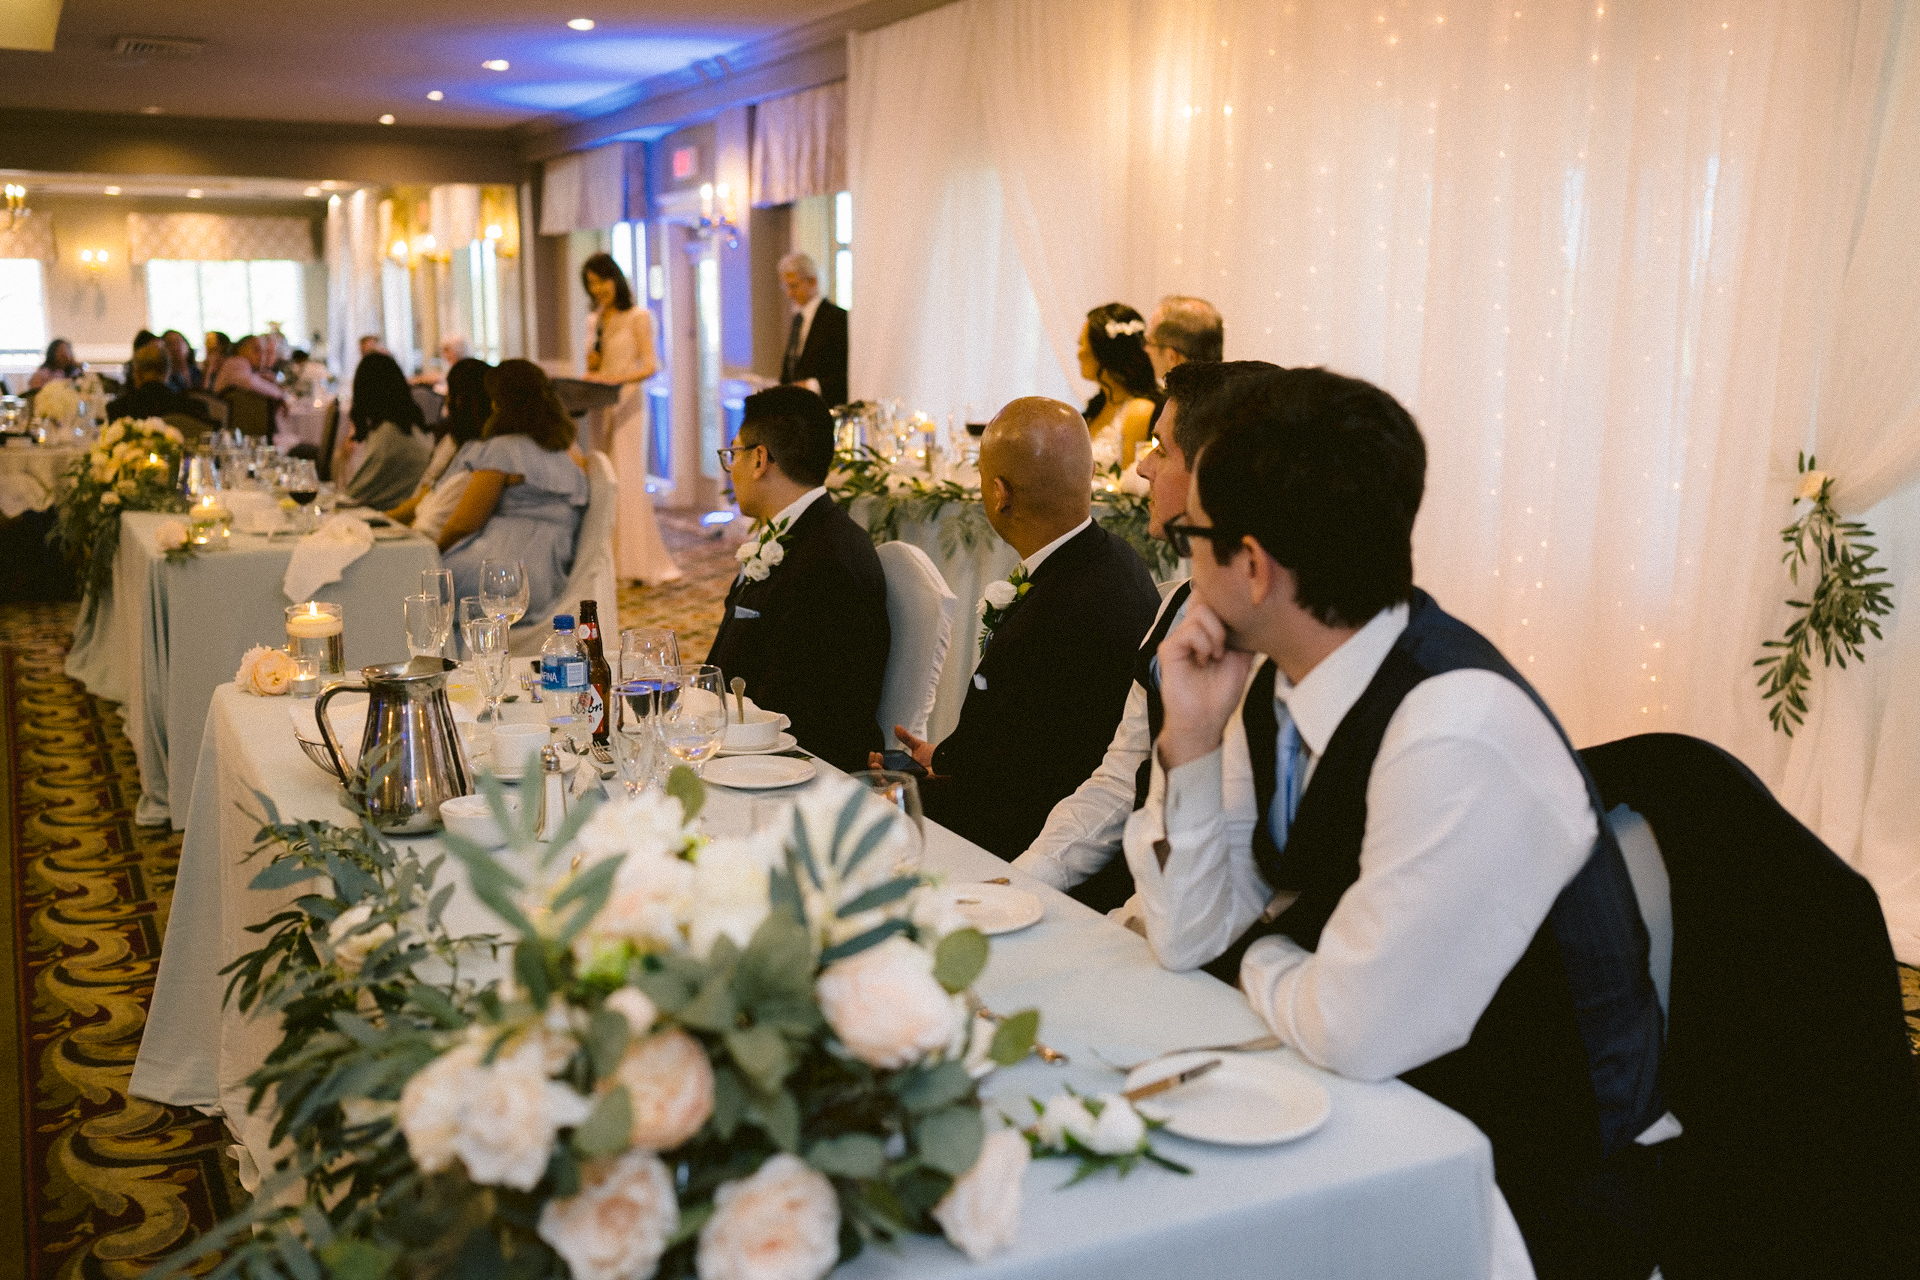 Guests seated at a decorated head table during a wedding reception.